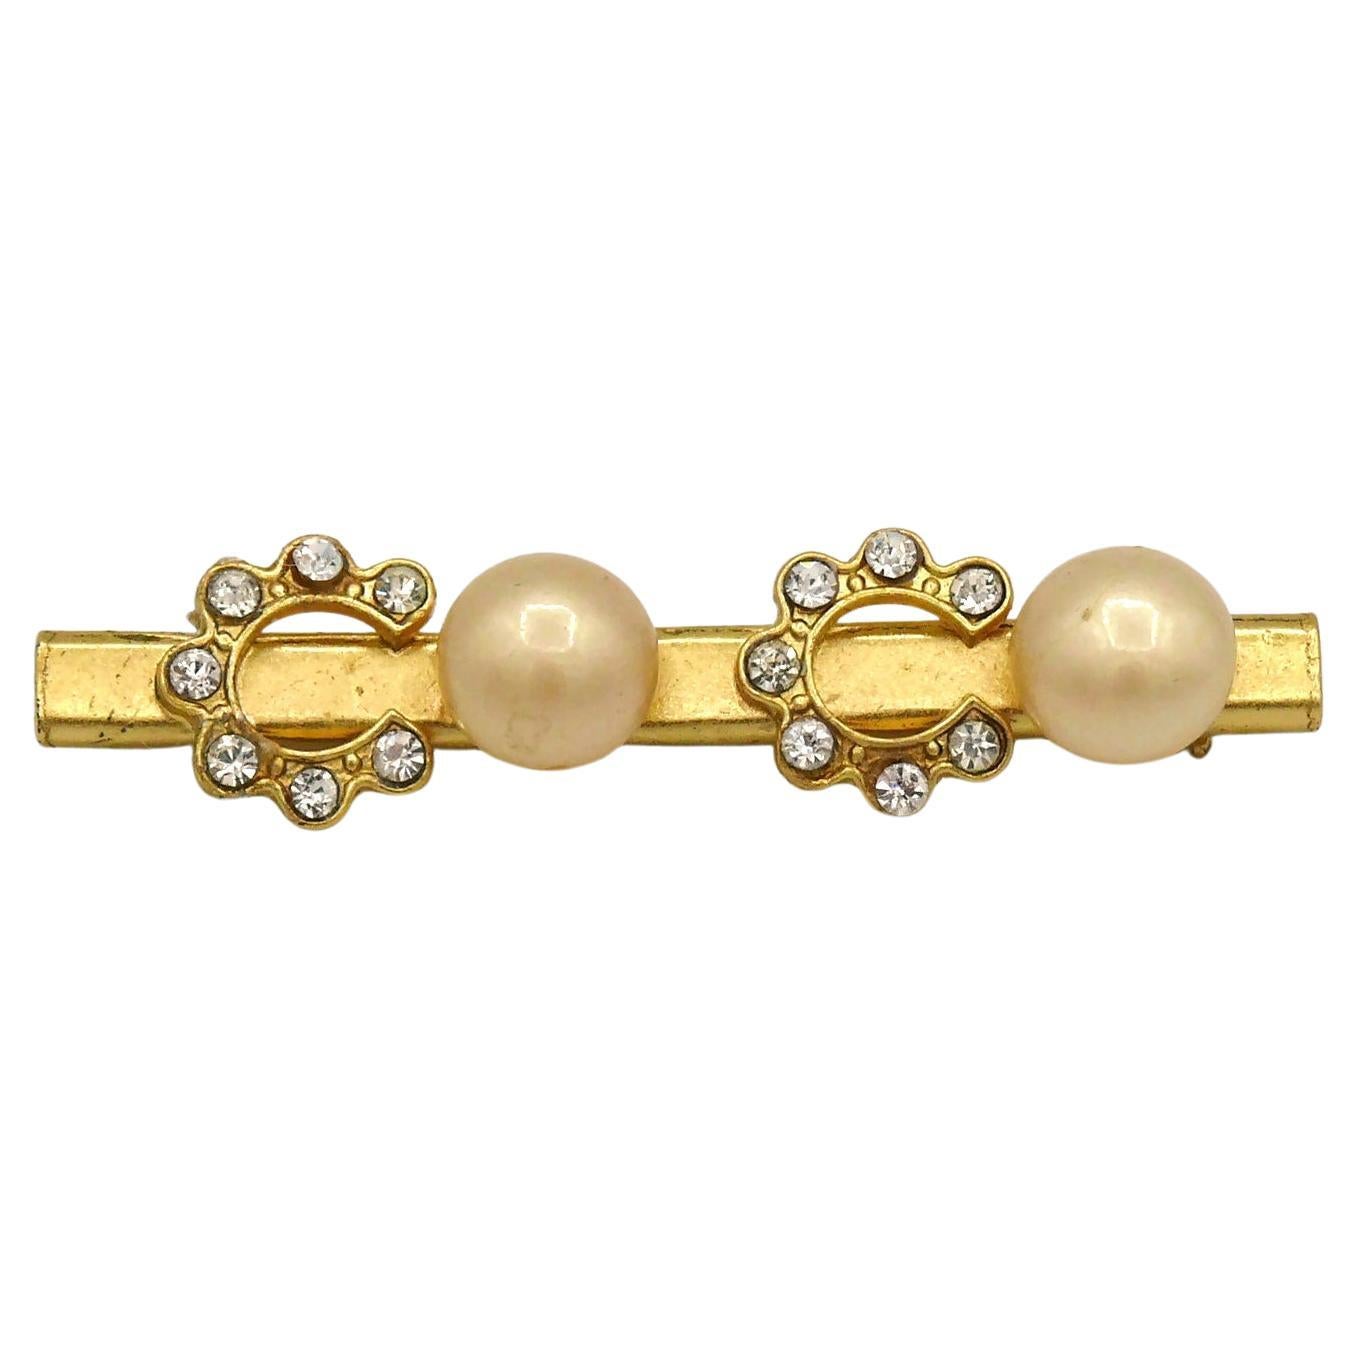 Chanel Vintage Spelling C O C O Pearl and Crystal Brooch